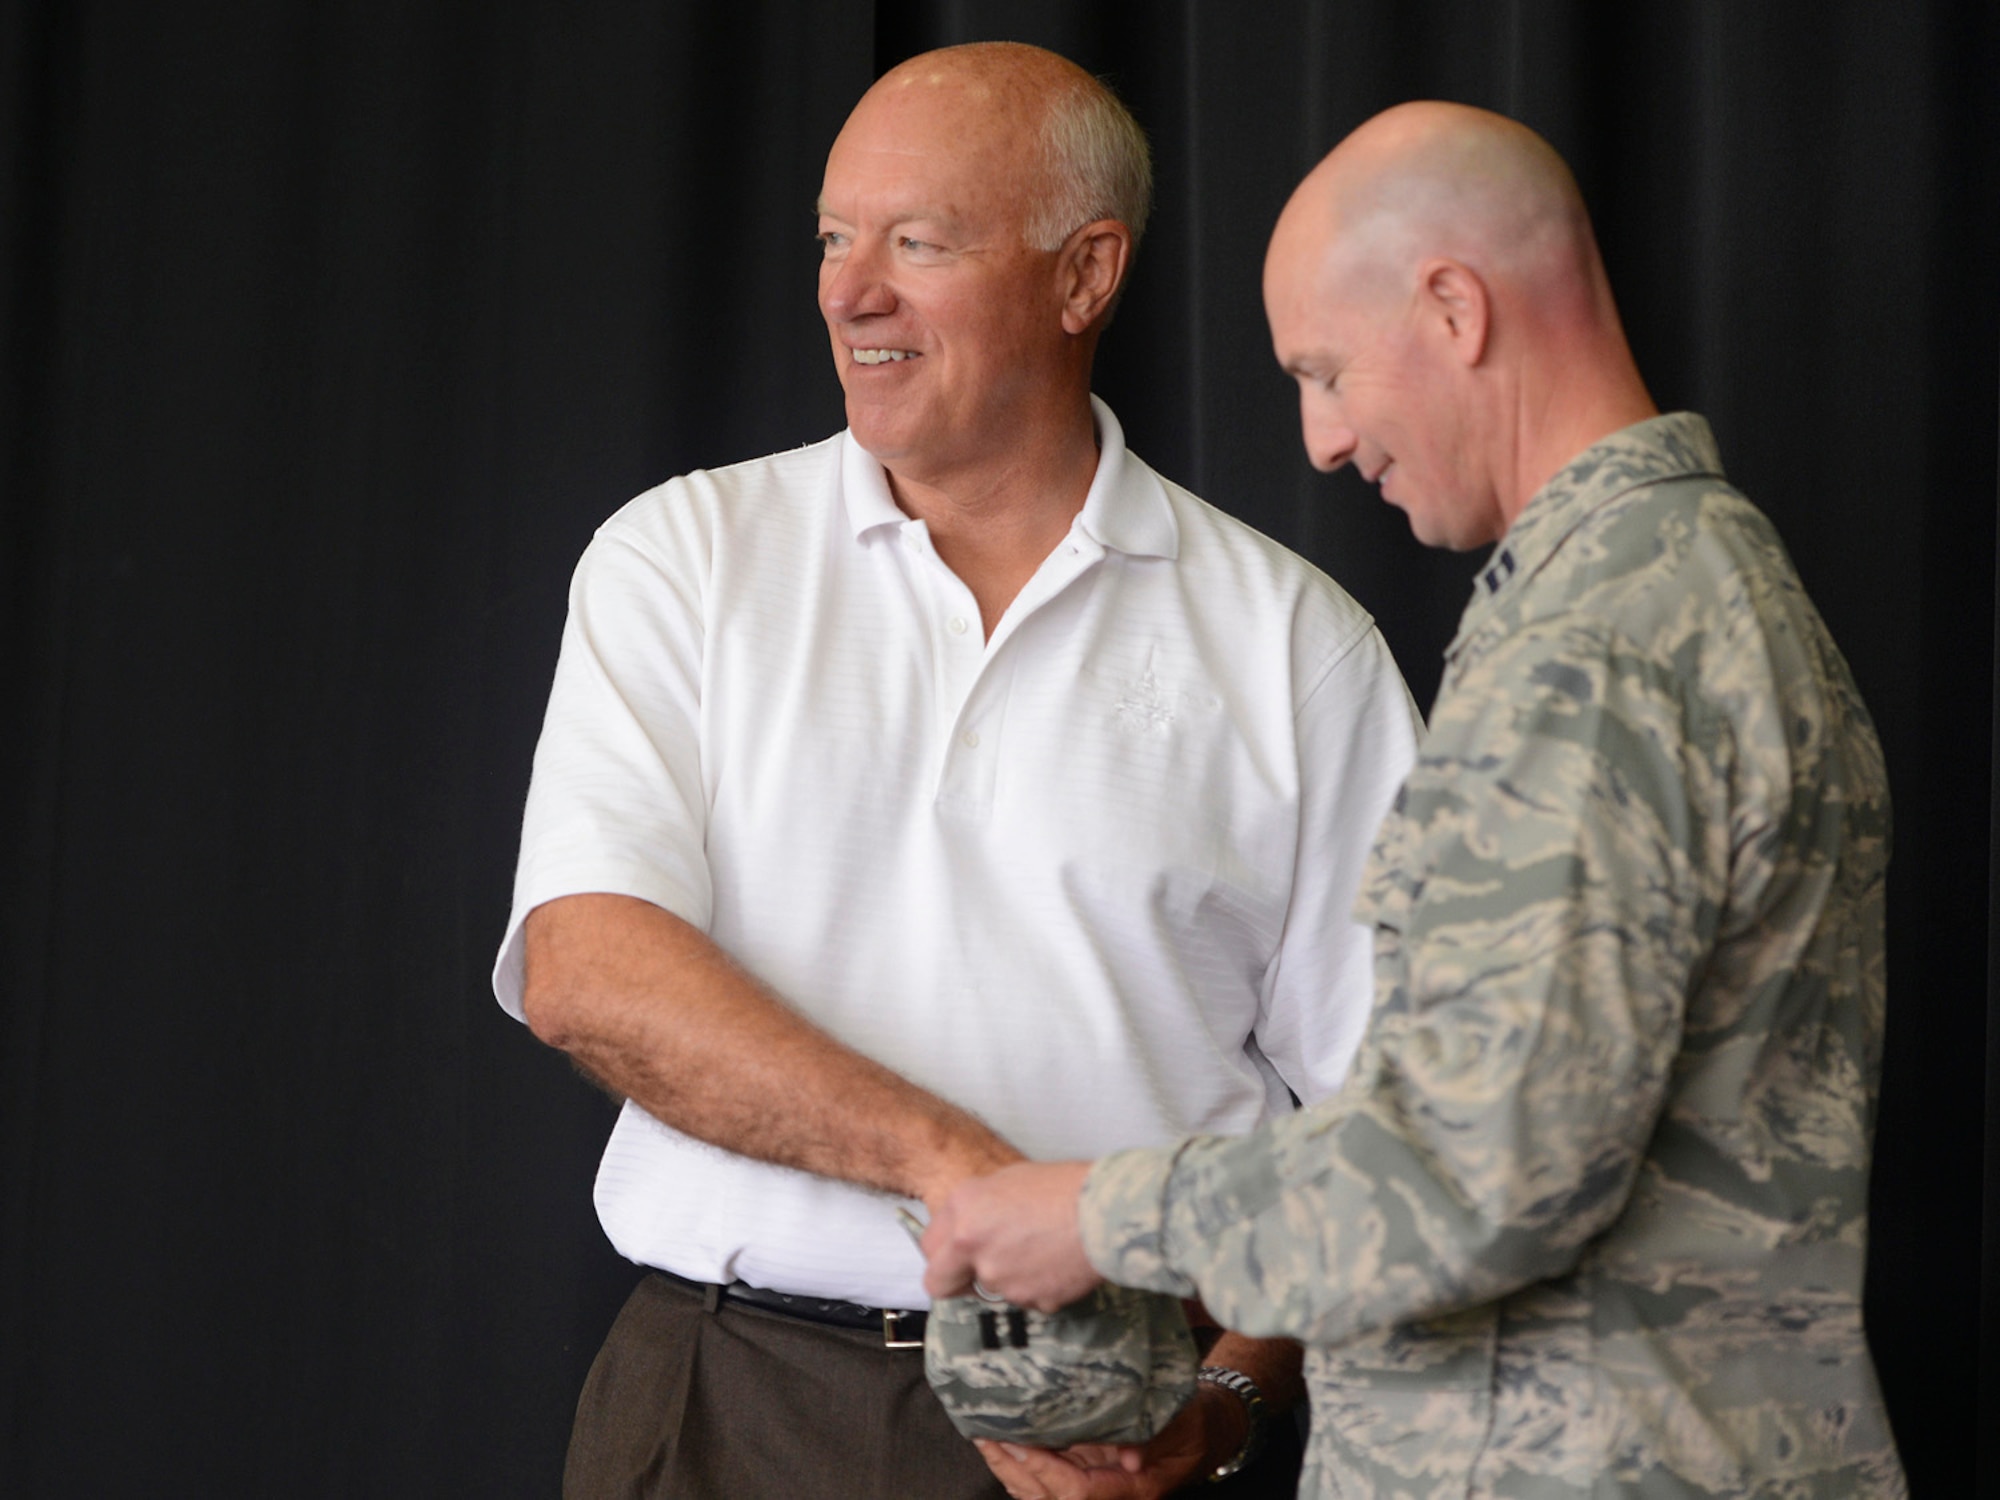 During a Commanders Call at the Tulsa Air National Guard base, June 8, 2014, former Director of the Air National Guard, Lieutenant General Harry M. (Bud) Wyatt III (Ret.), draws the winning name of a 138th Fighter Wing recruiting challenge.   Colonel David B. Burgy, 138th FW Commander, regularly issues the recruiting challenge to members of the 138th and includes a monetary award as incentive.   (U.S. National Guard photo by Master Sgt.  Mark A. Moore/Released)